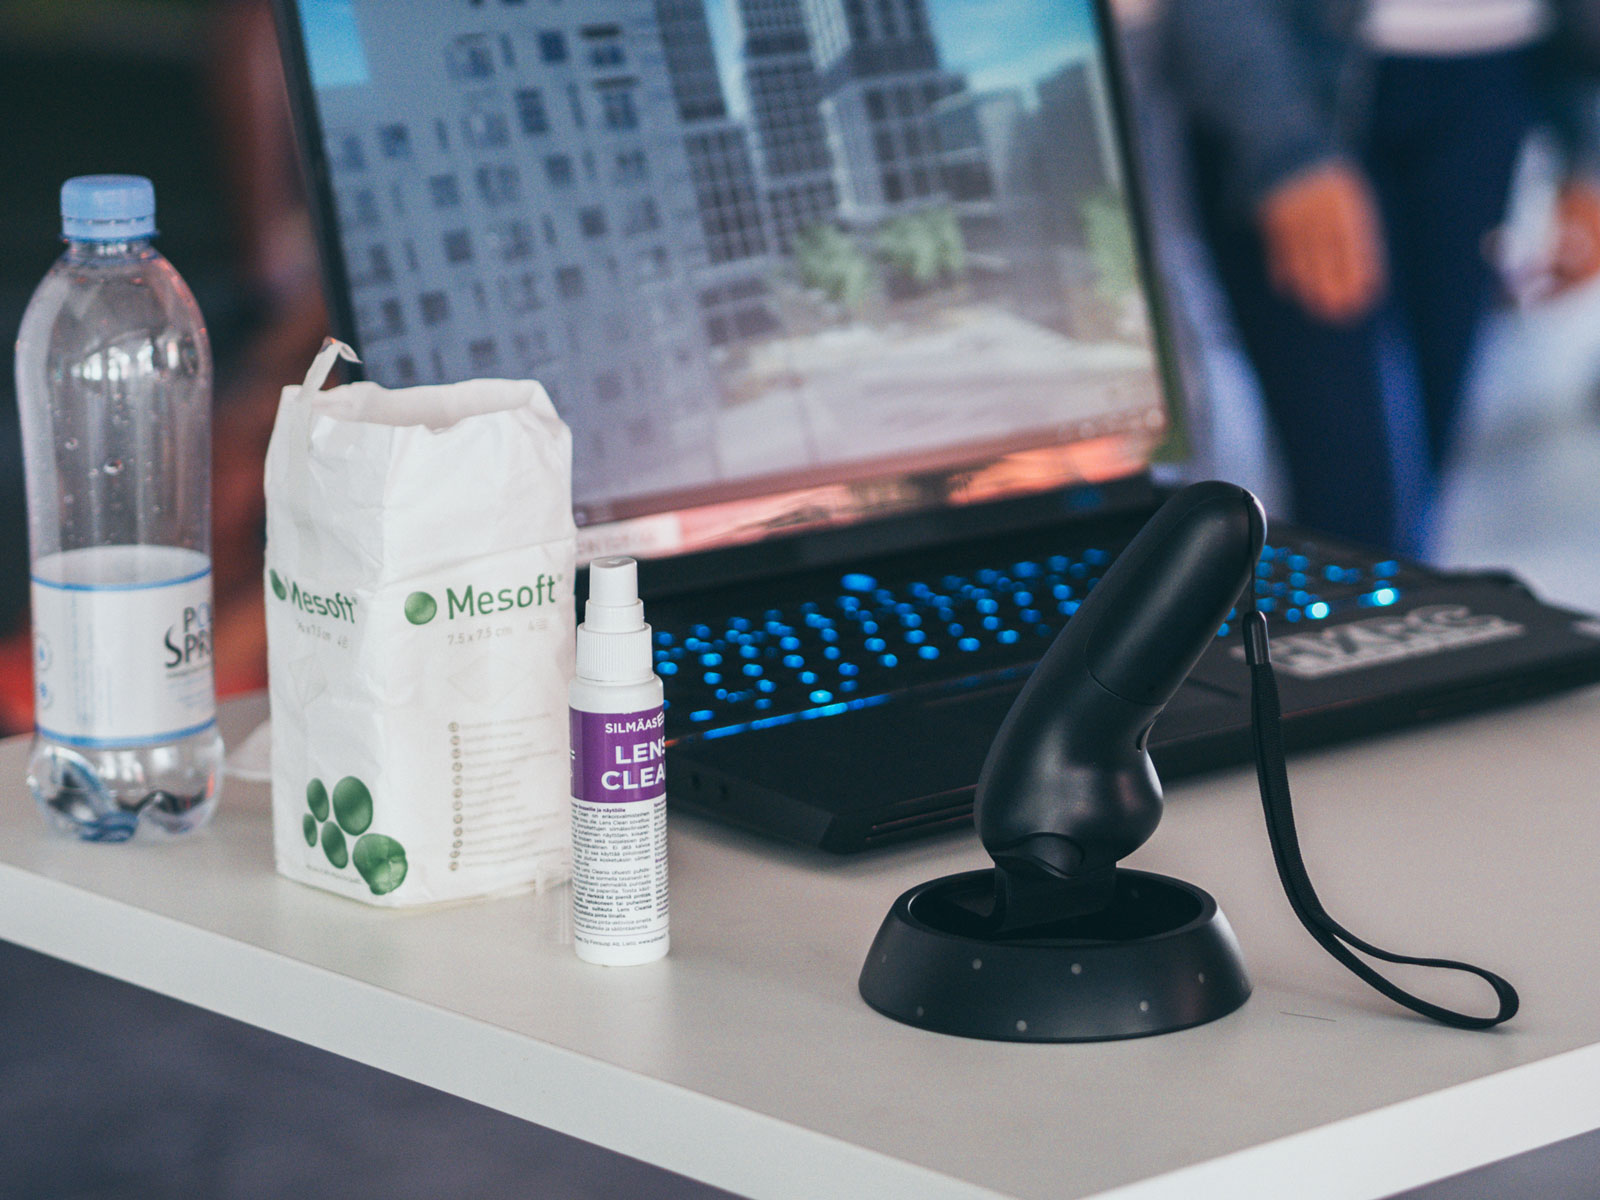 A VR headset controller on a desk, surrounded by cleaning tools.